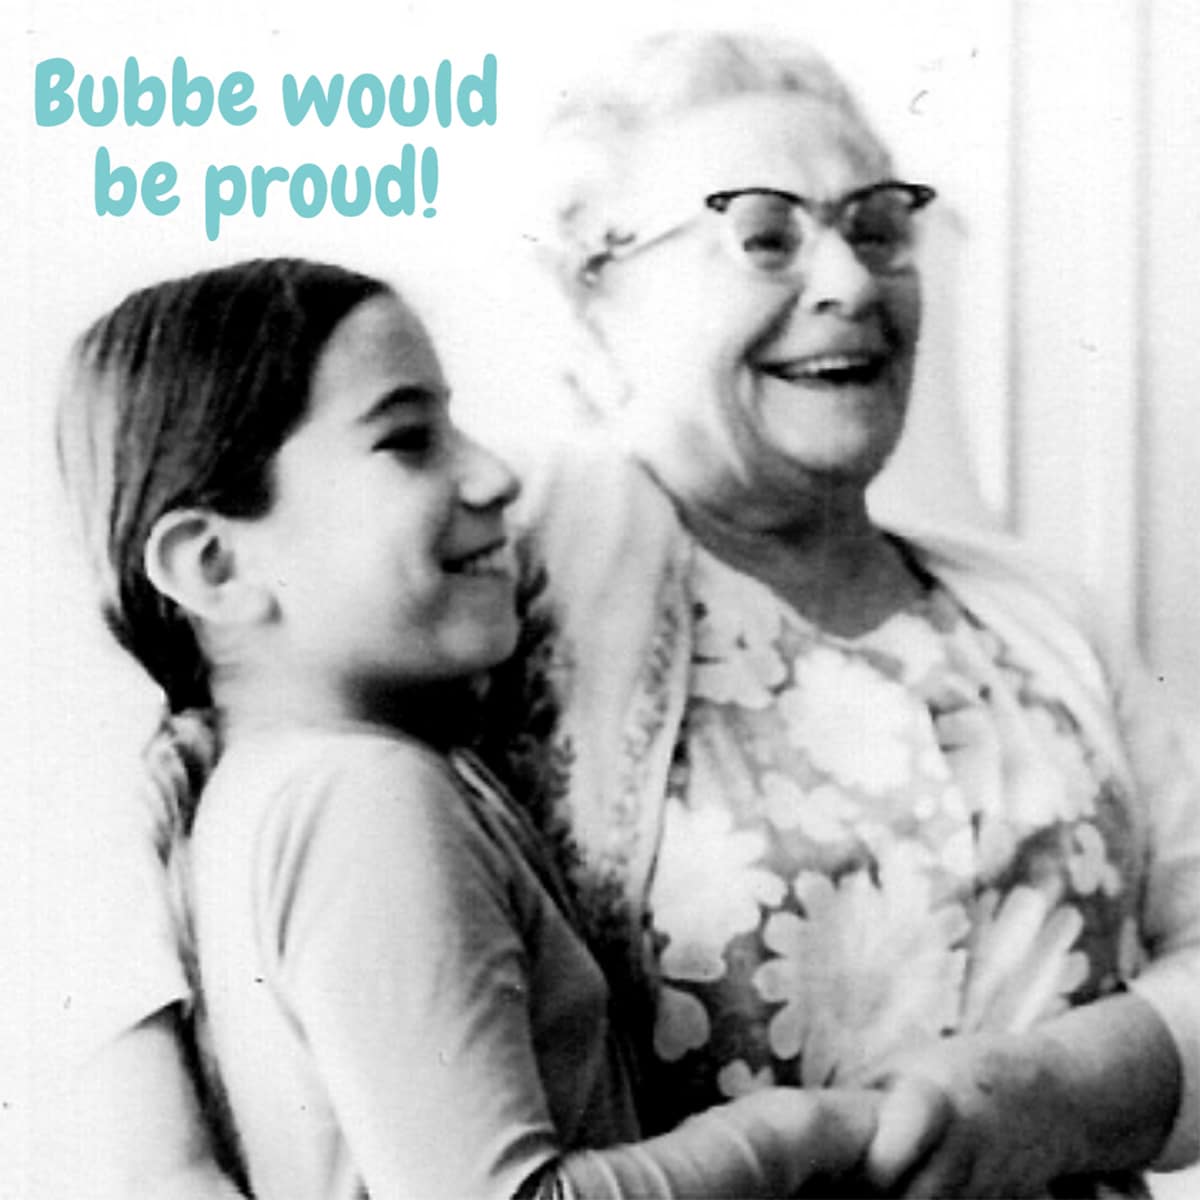 Old black and white photo of Bubbe and Beth with text say "Bubbe would be proud!" in the upper left.